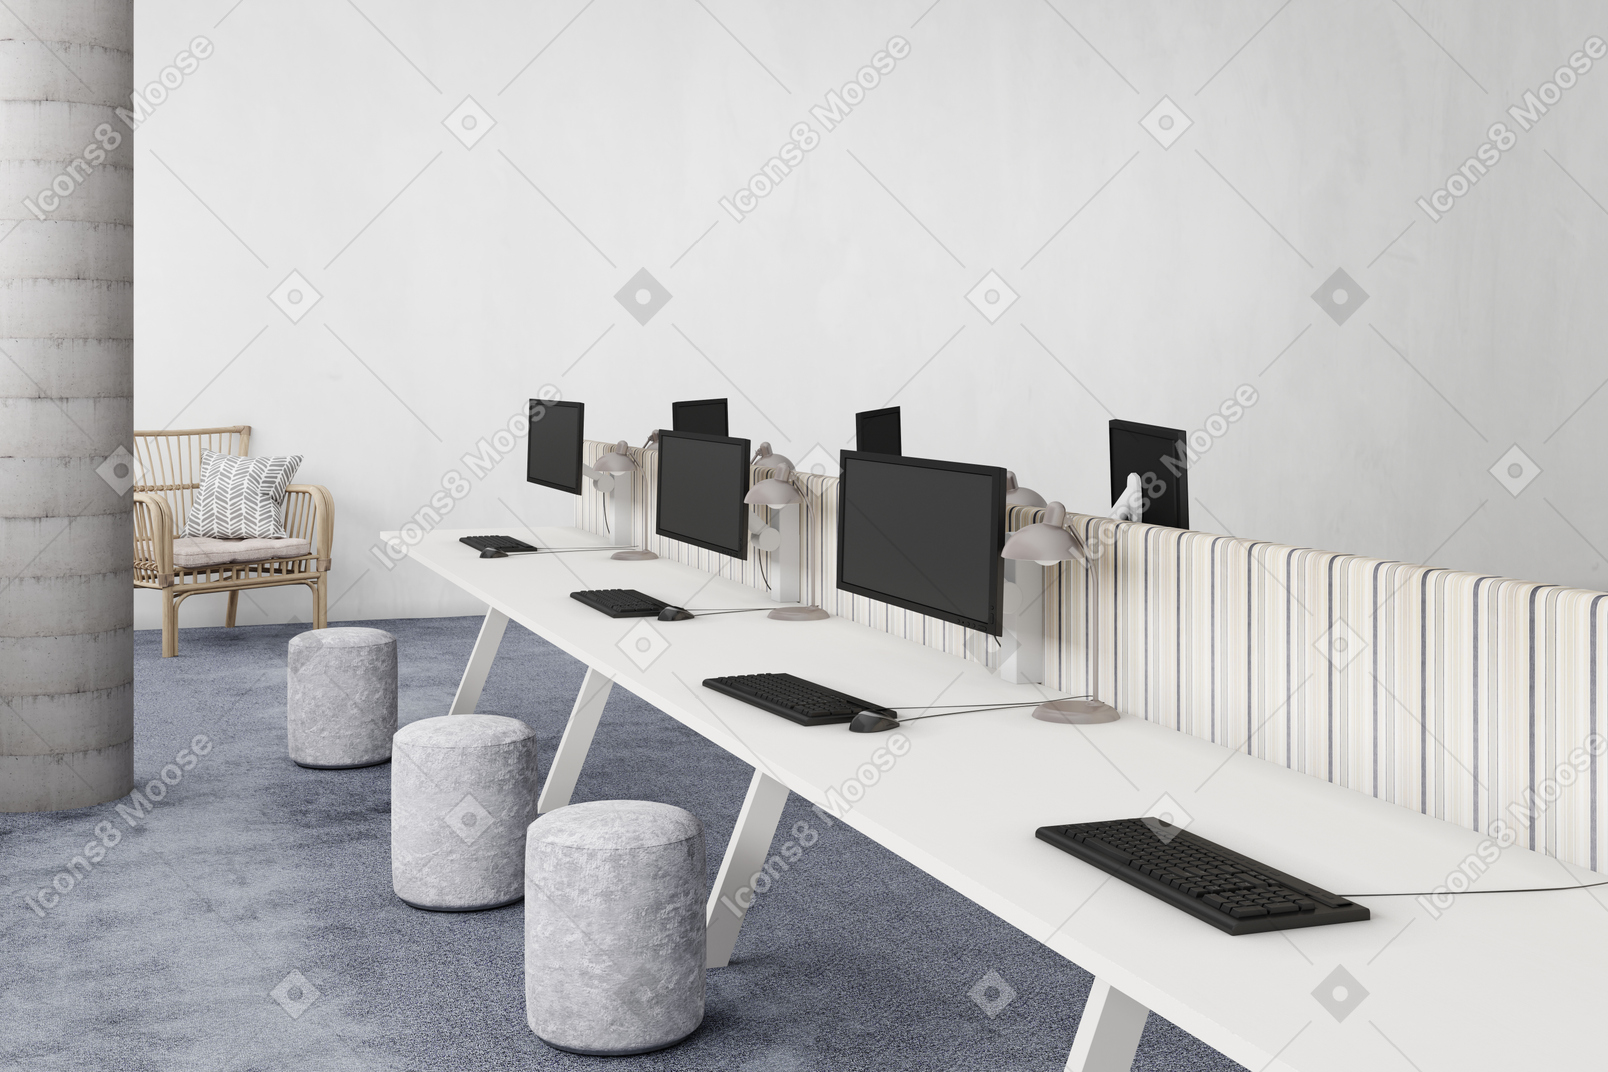 Coworking space with computers and pouffes